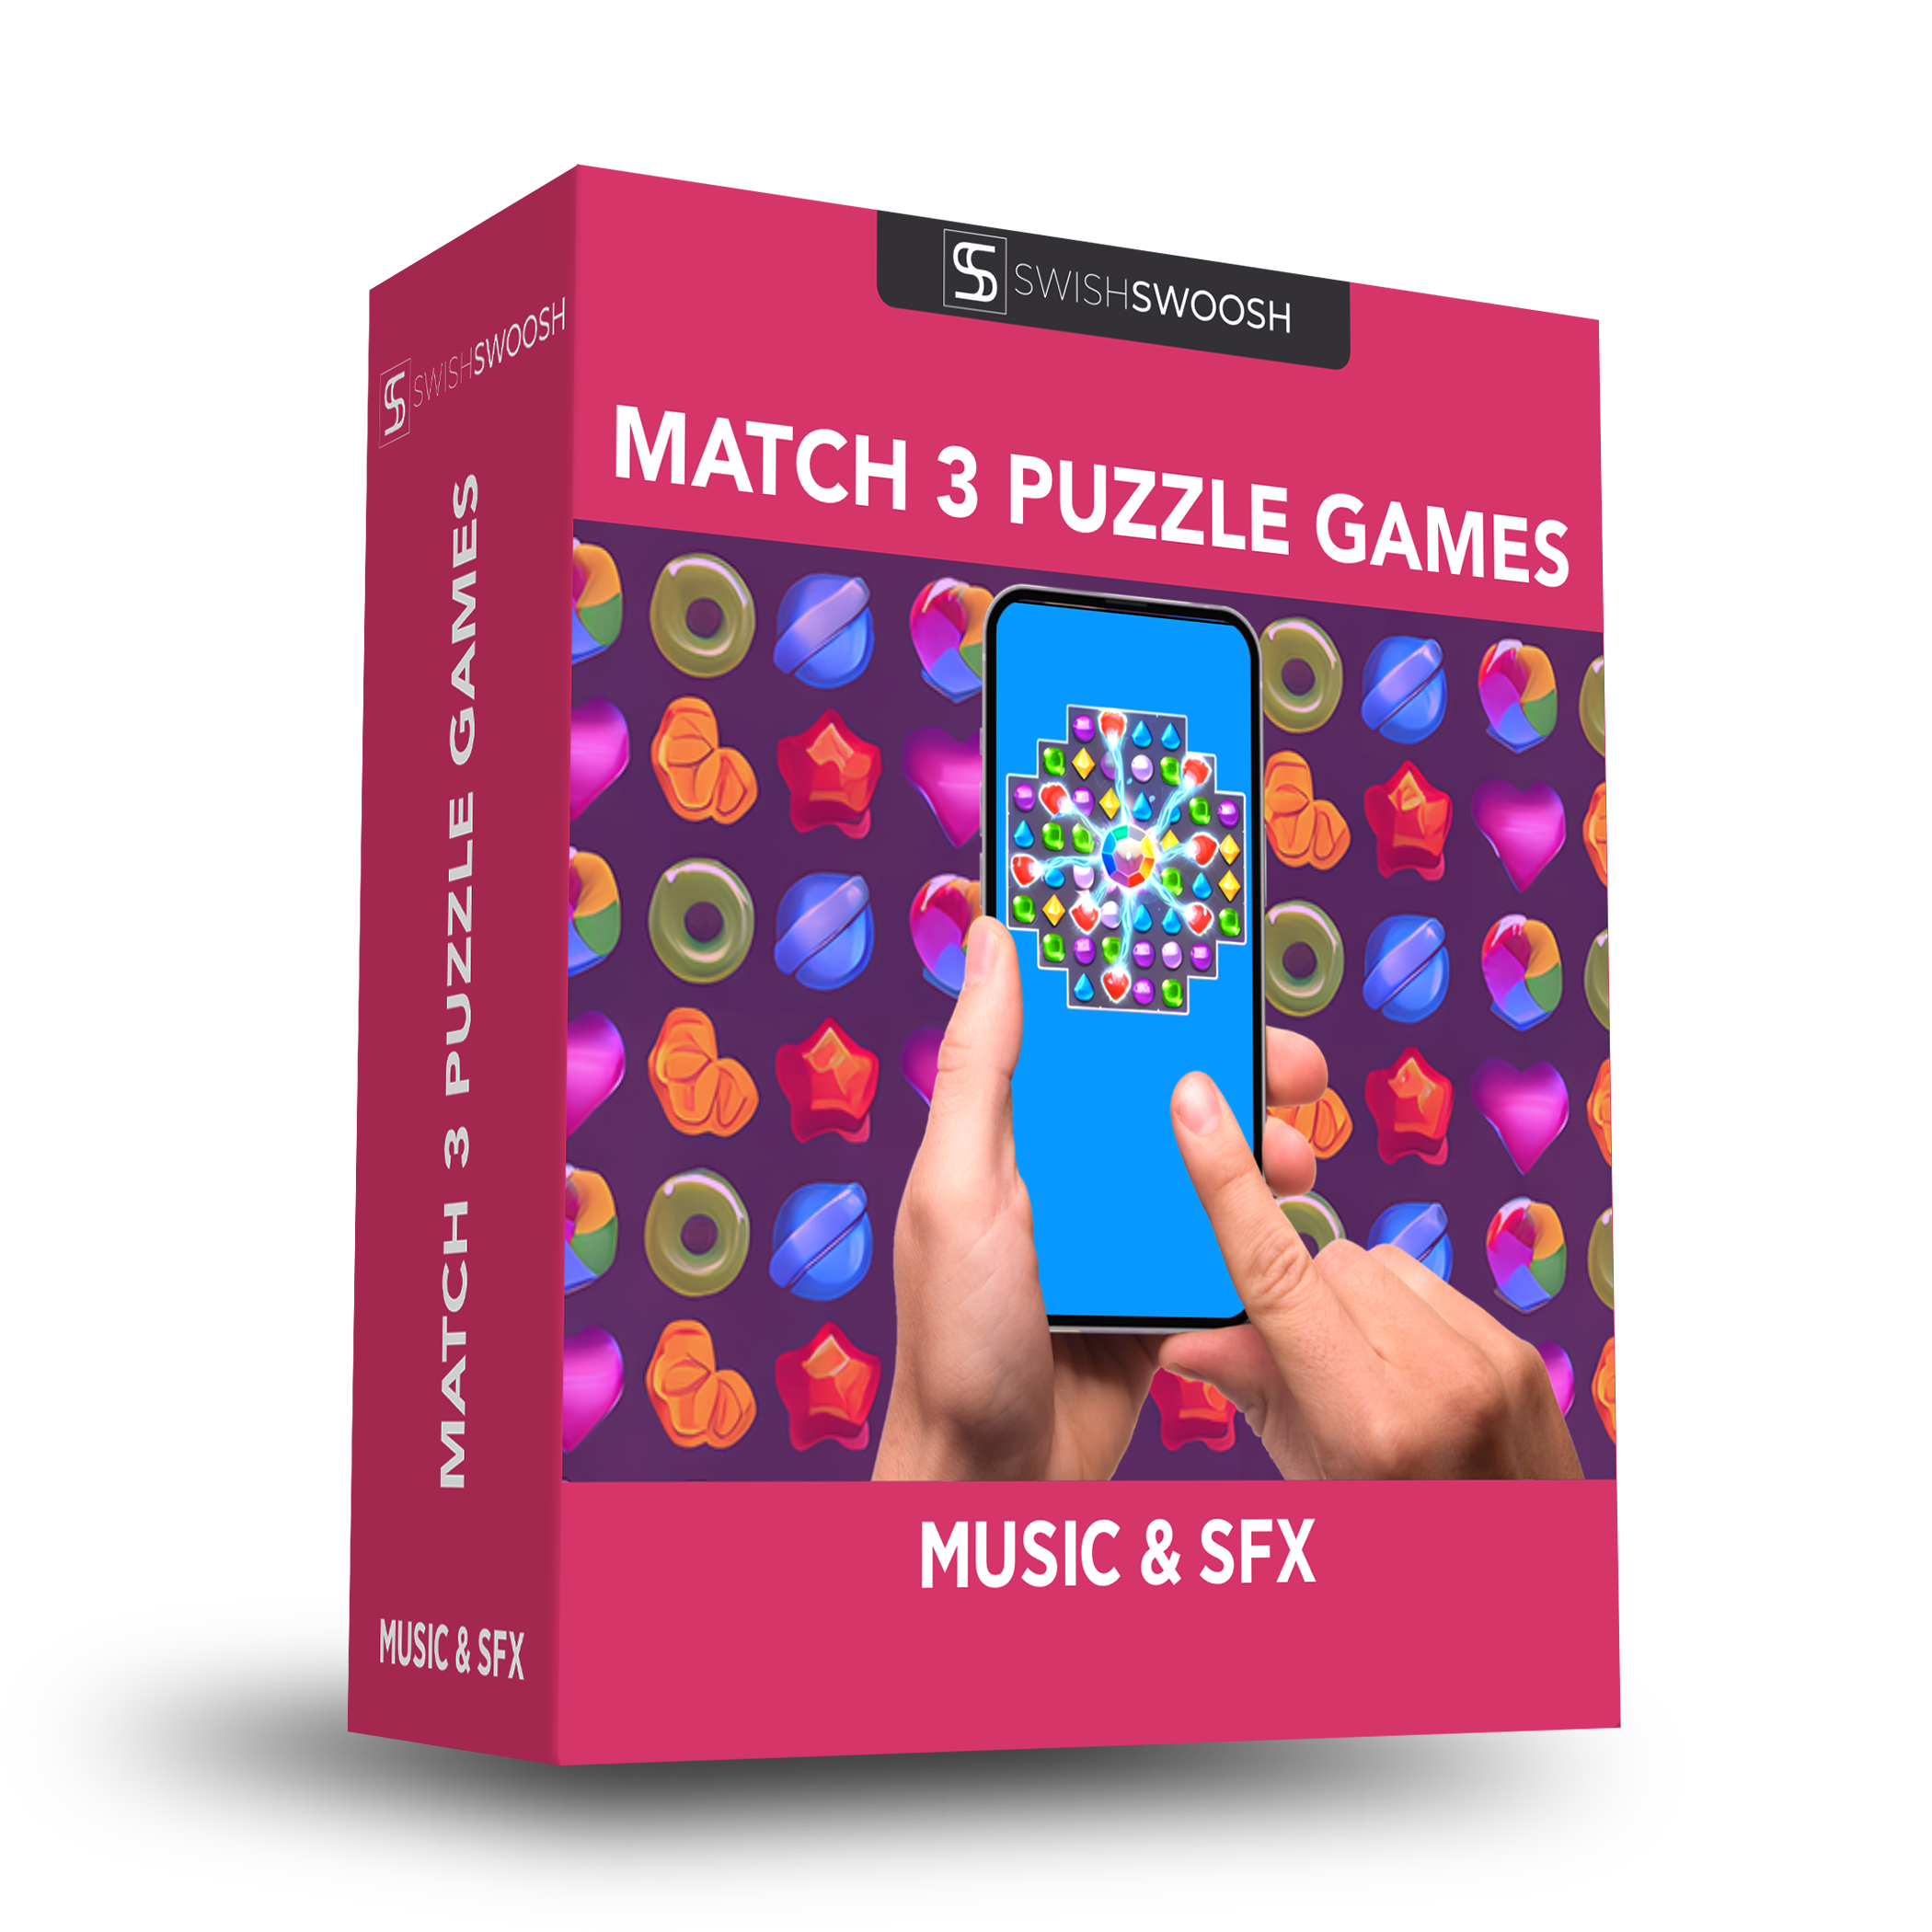 3D Match Games Sound Effects and Music Pack - Epic Stock Media